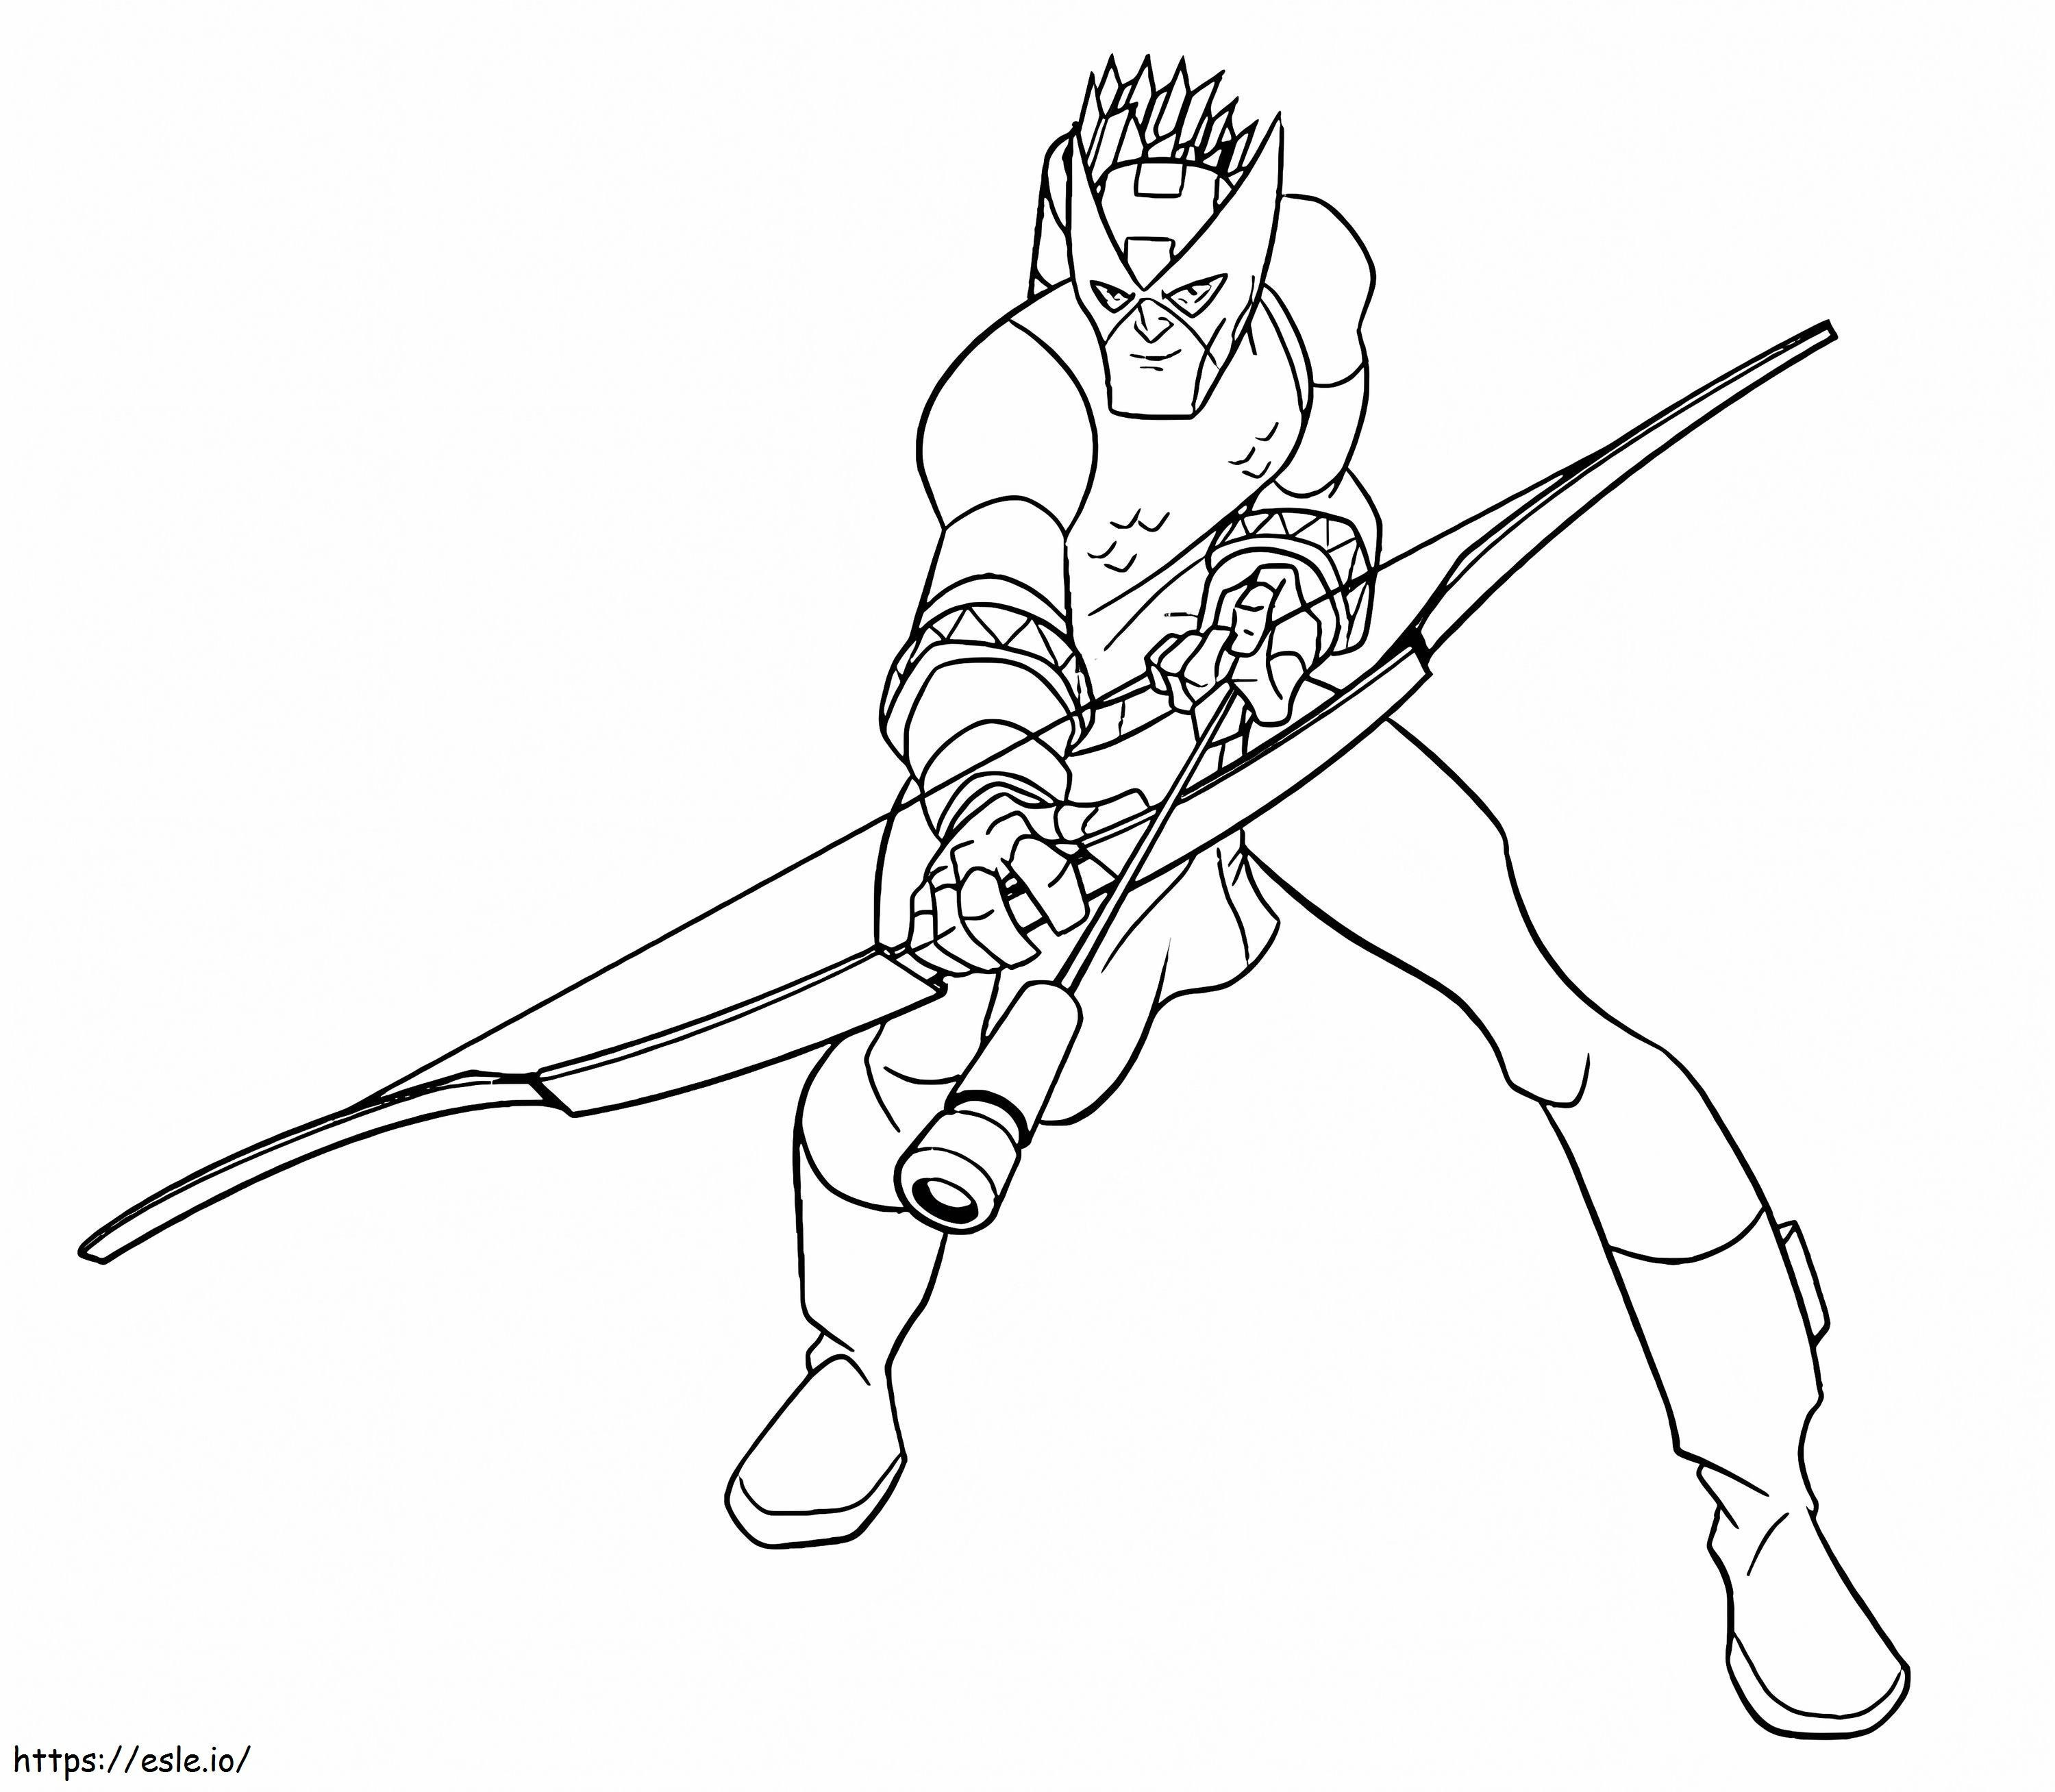 Hawkeye 6 coloring page